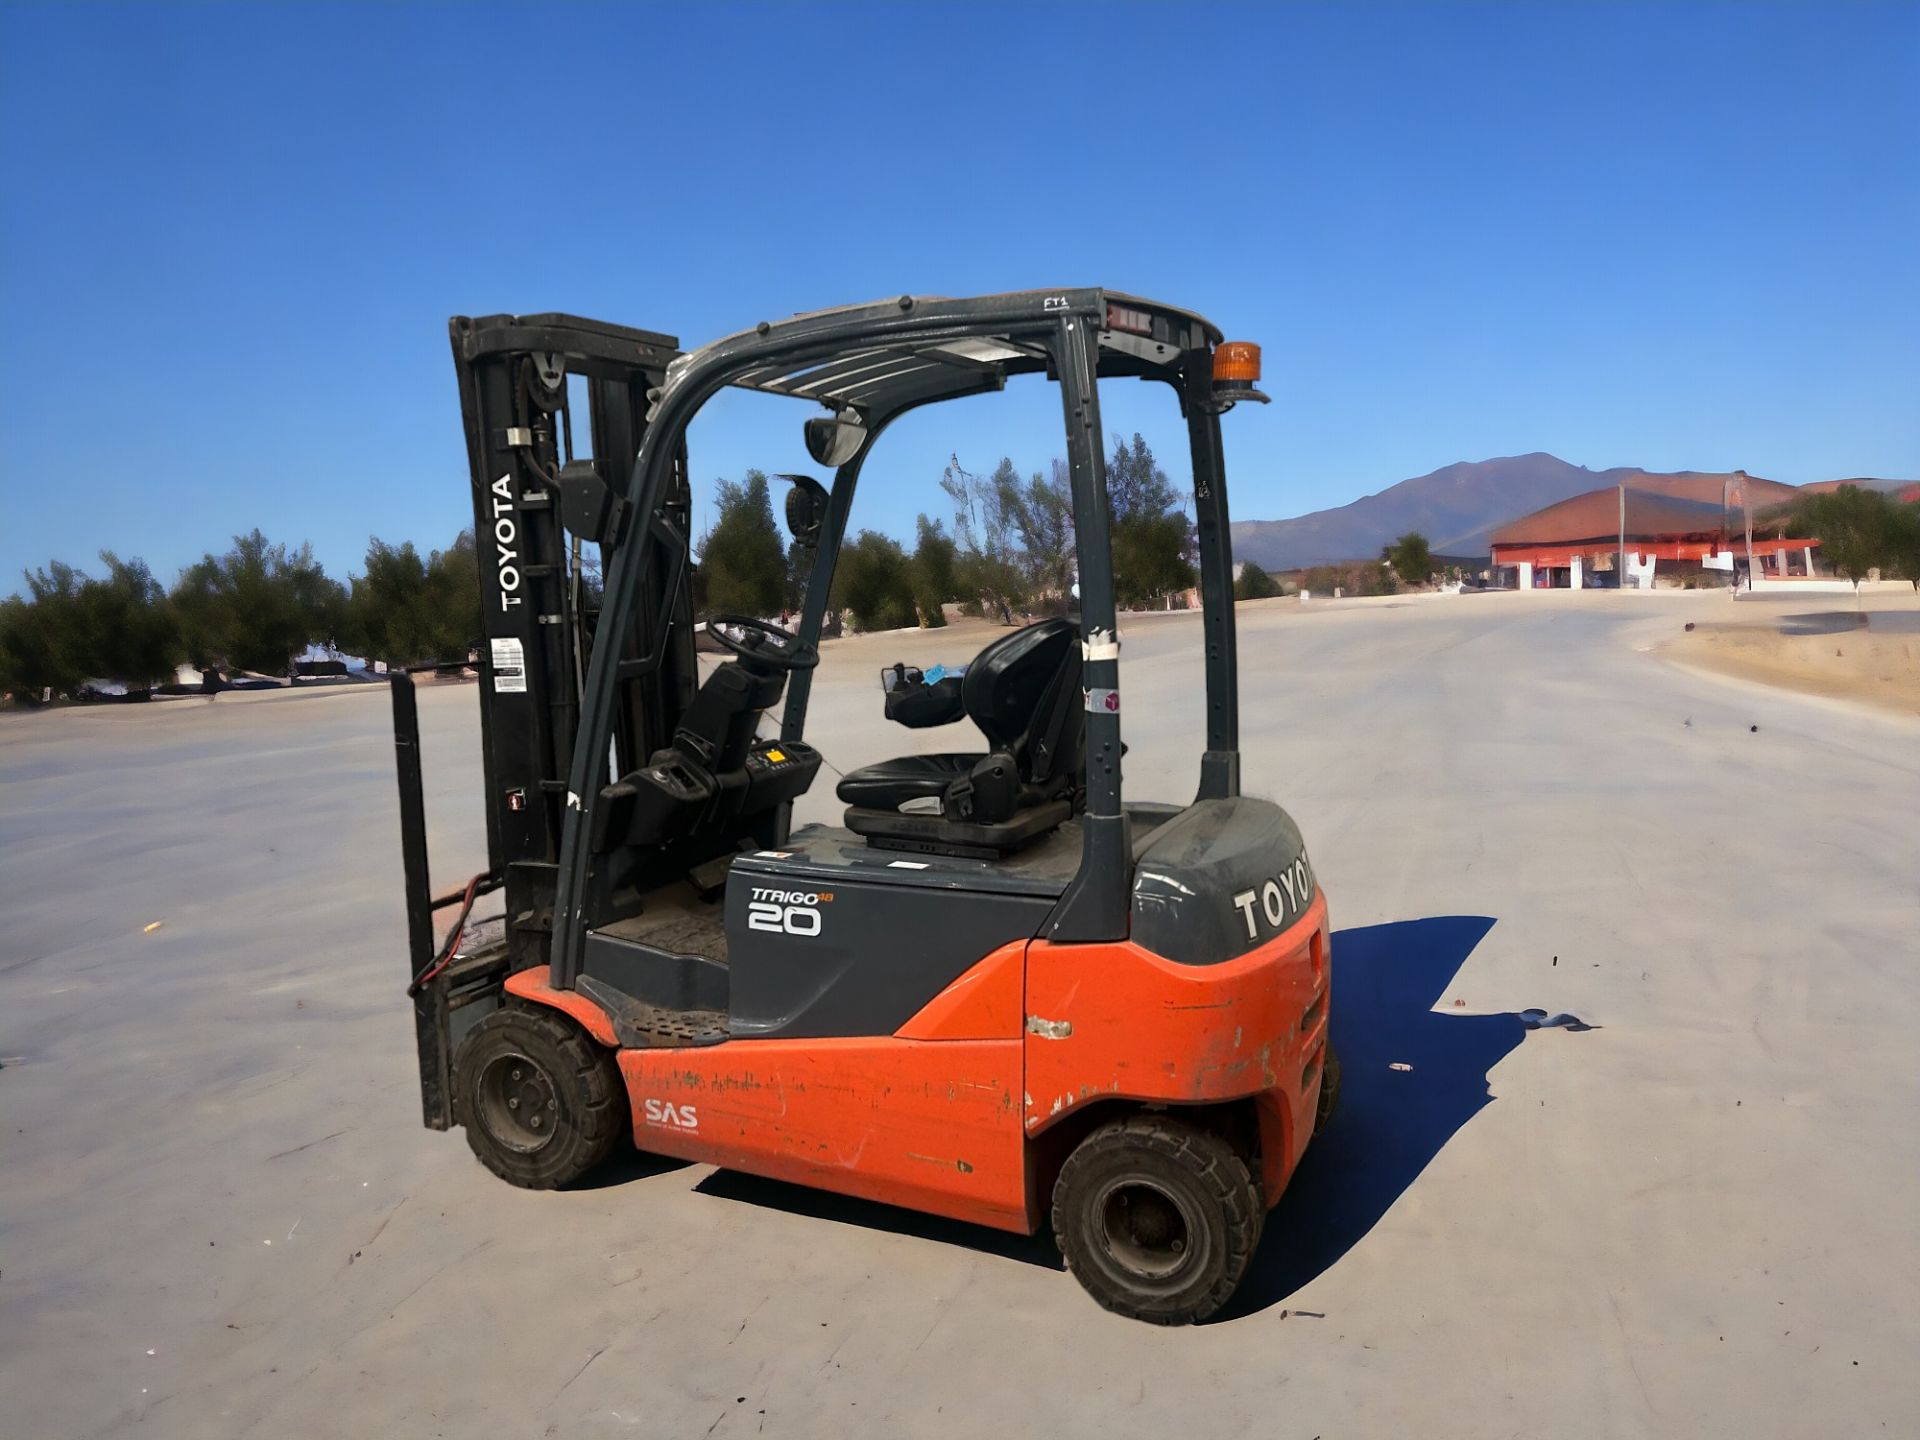 TOYOTA 8FBM20T ELECTRIC FORKLIFT - EFFICIENT MATERIAL HANDLING SOLUTION **(INCLUDES CHARGER)**